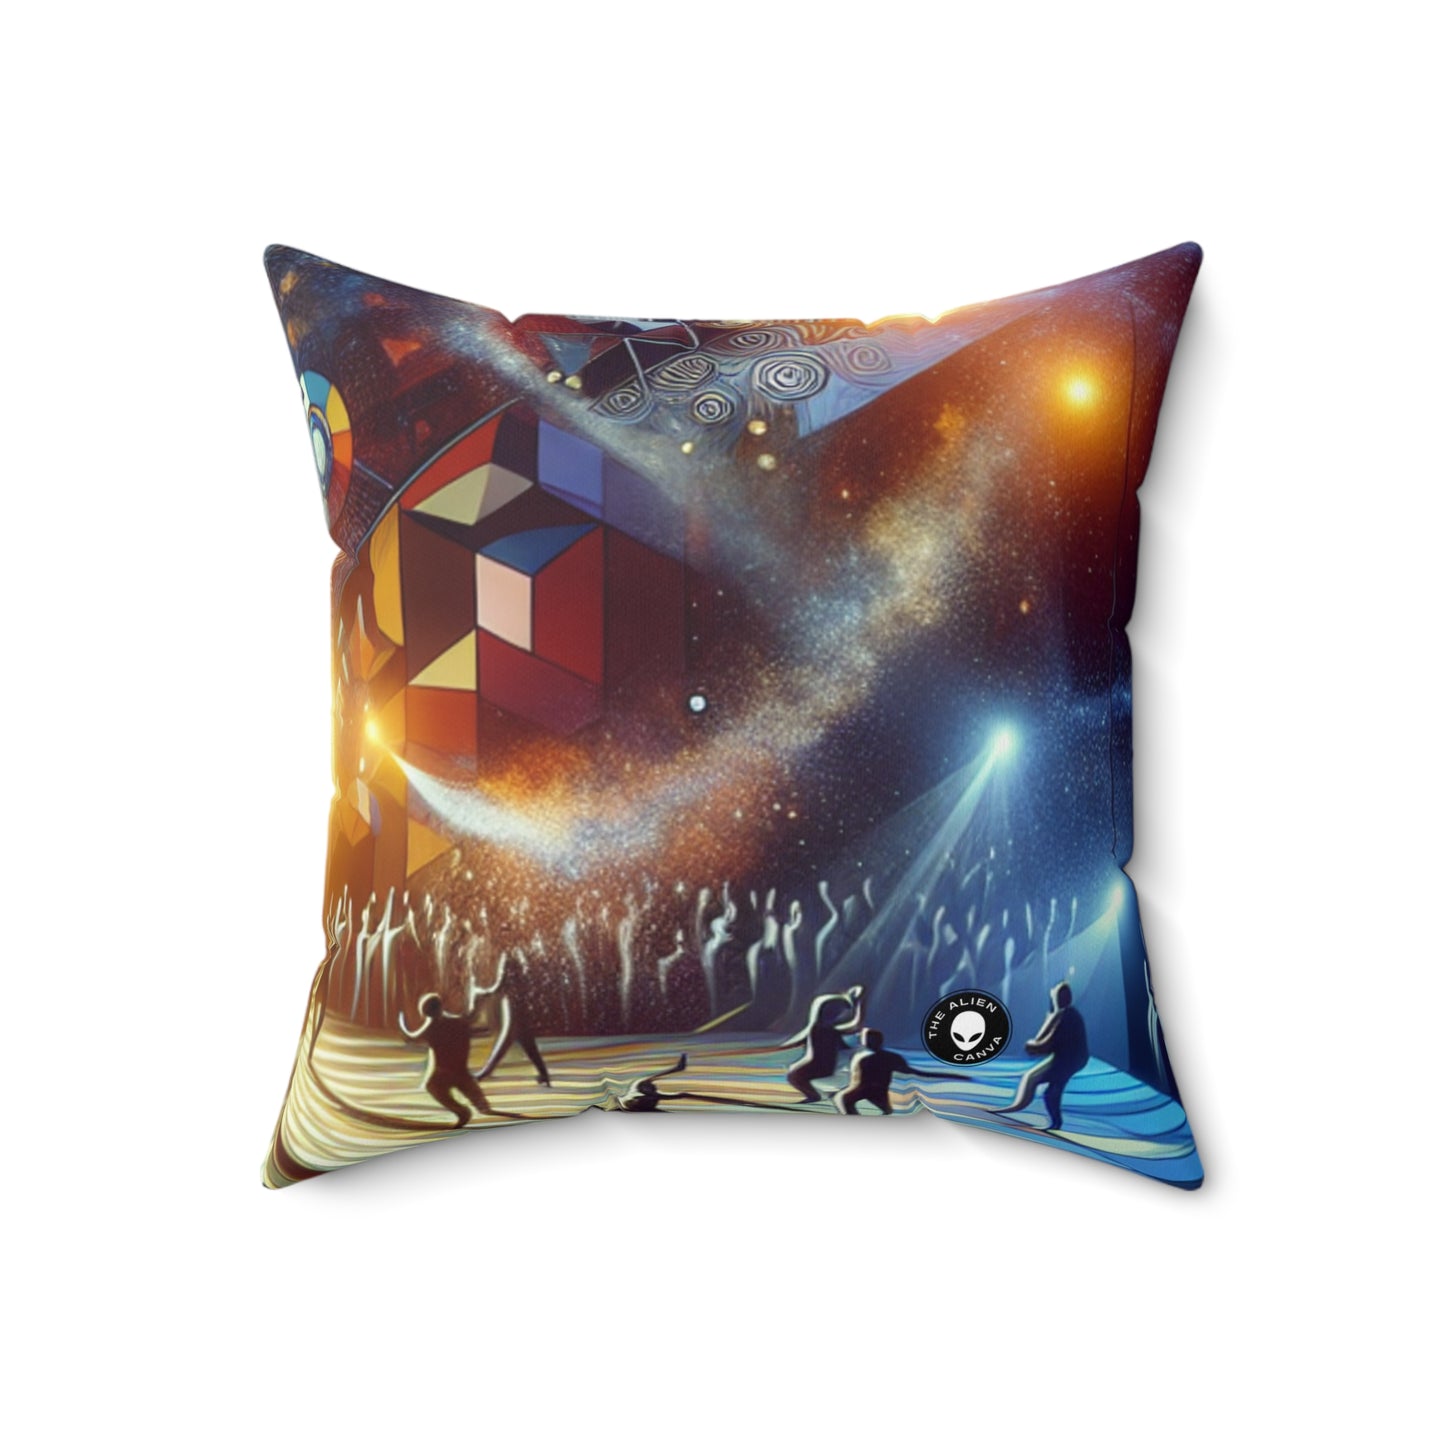 "Flight of the Artist: A Synchronized Dance with Nature"- The Alien Spun Polyester Square Pillow Performance Art